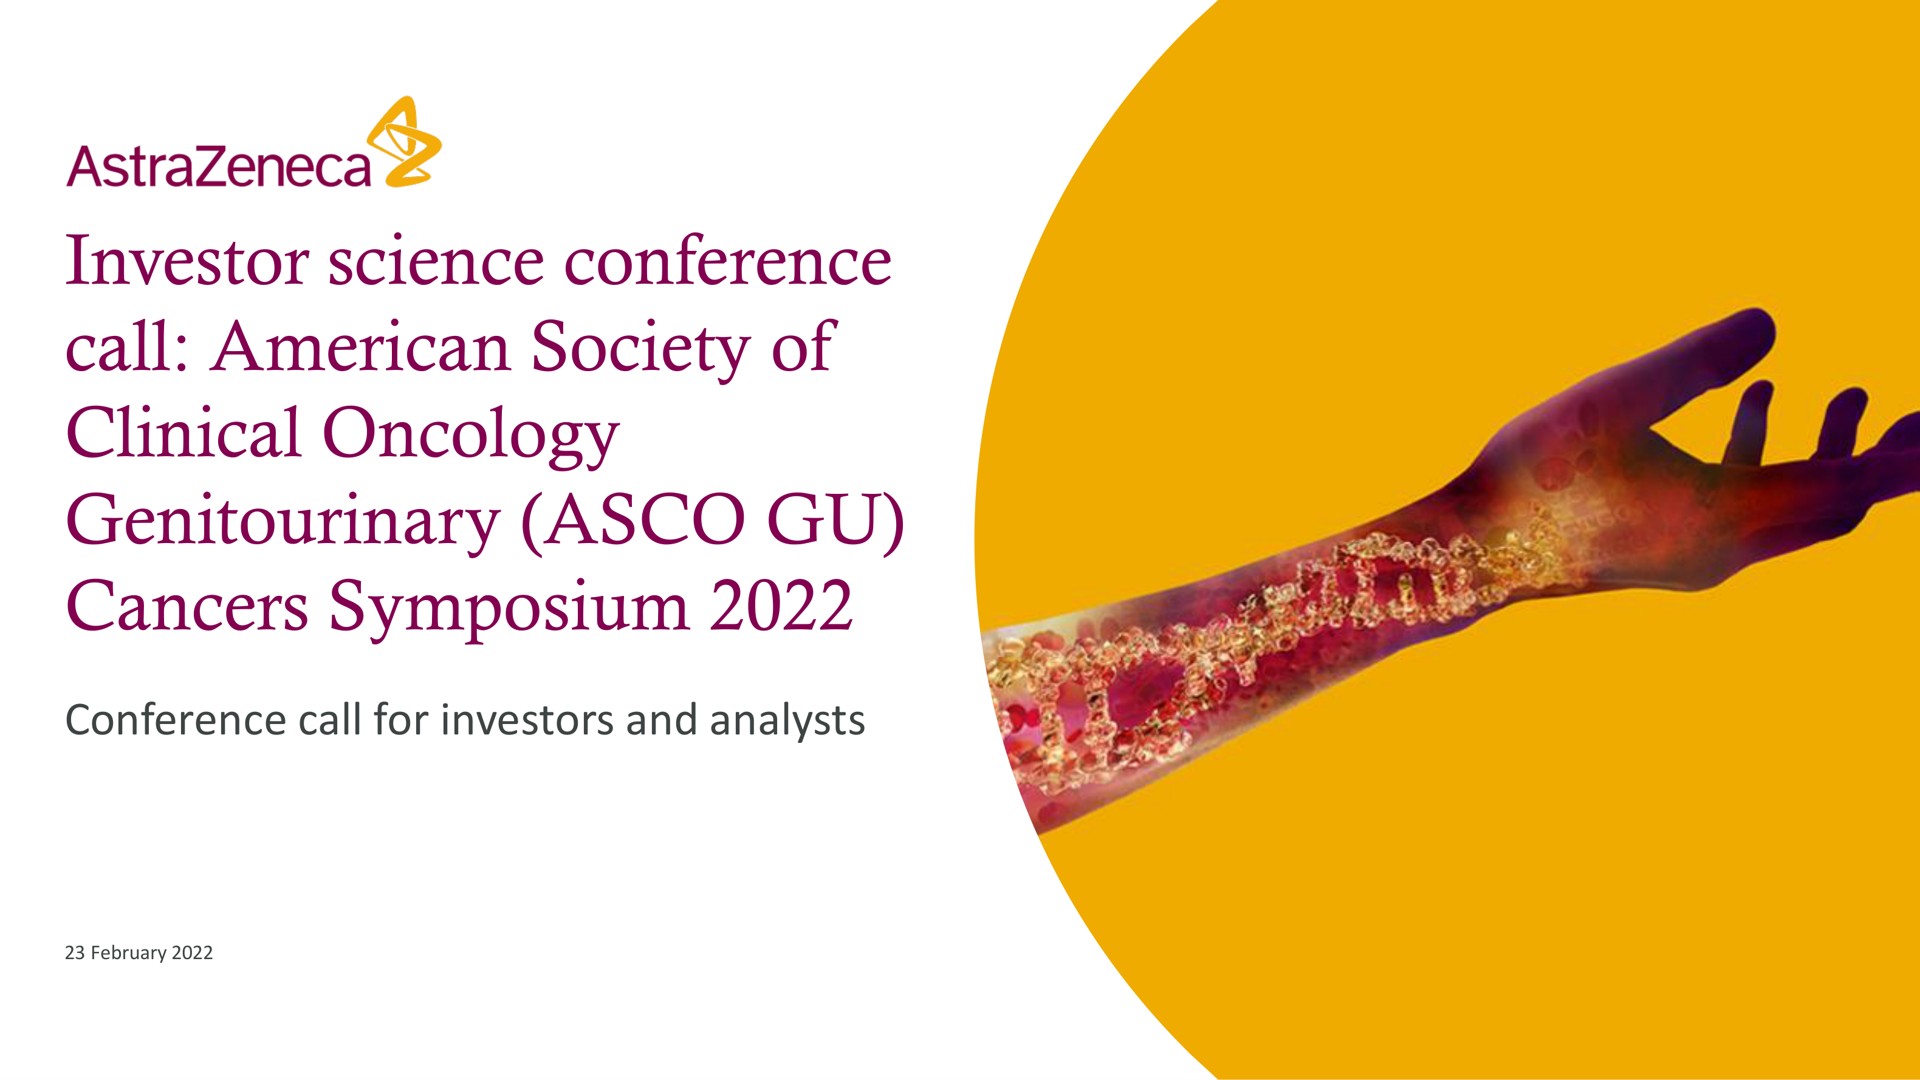 investor science conference call society of clinical oncology genitourinary cancers symposium | AstraZeneca